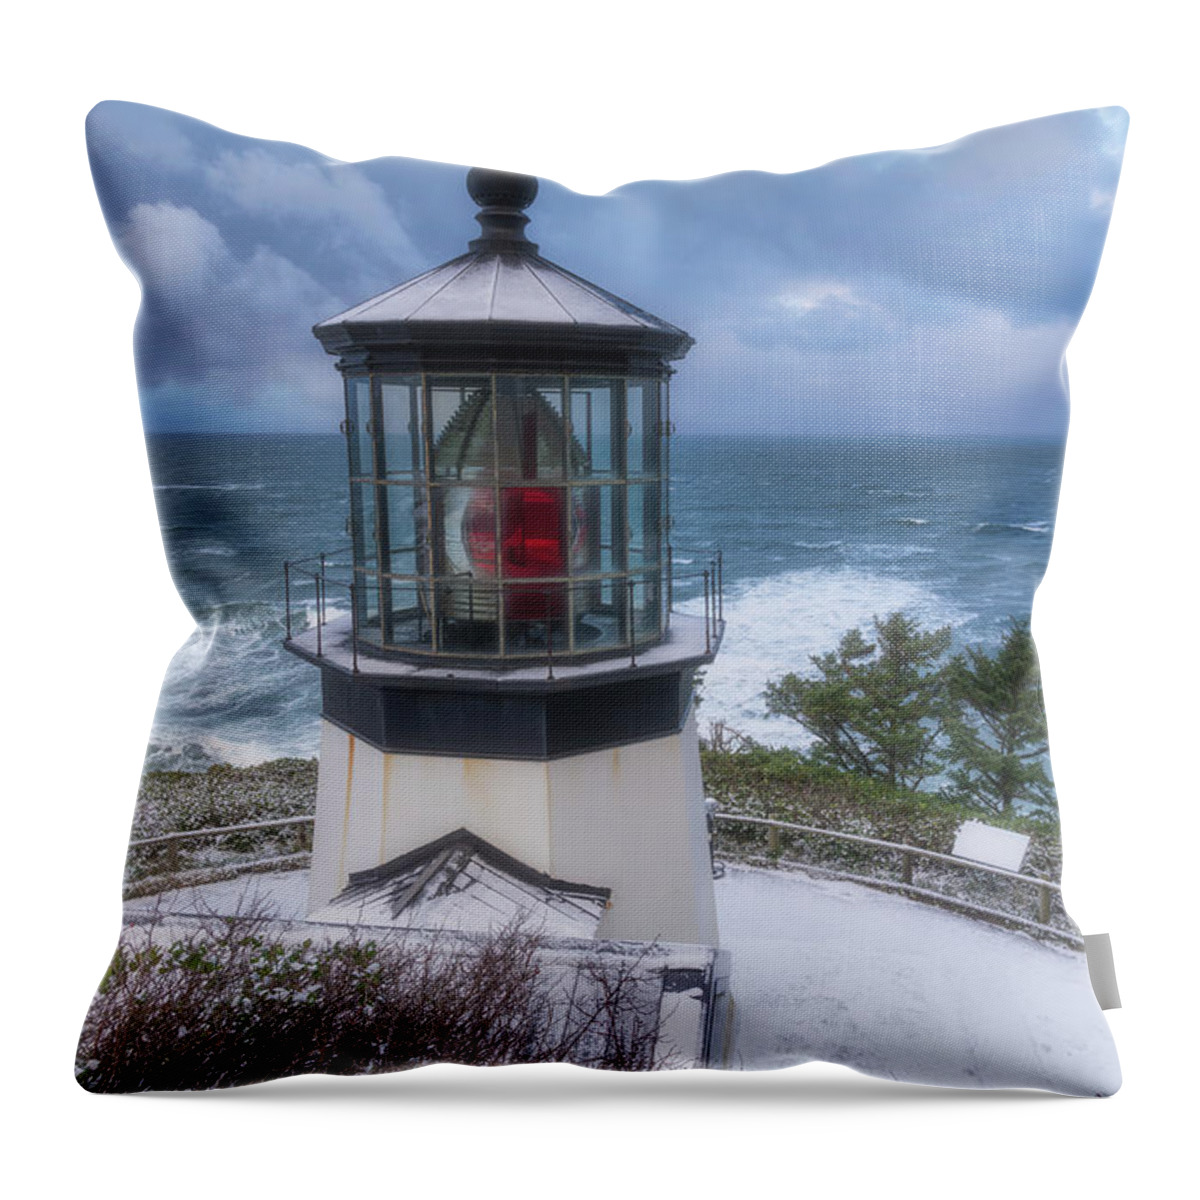 Lighthouse Throw Pillow featuring the photograph Lighthouse Christmas by Darren White